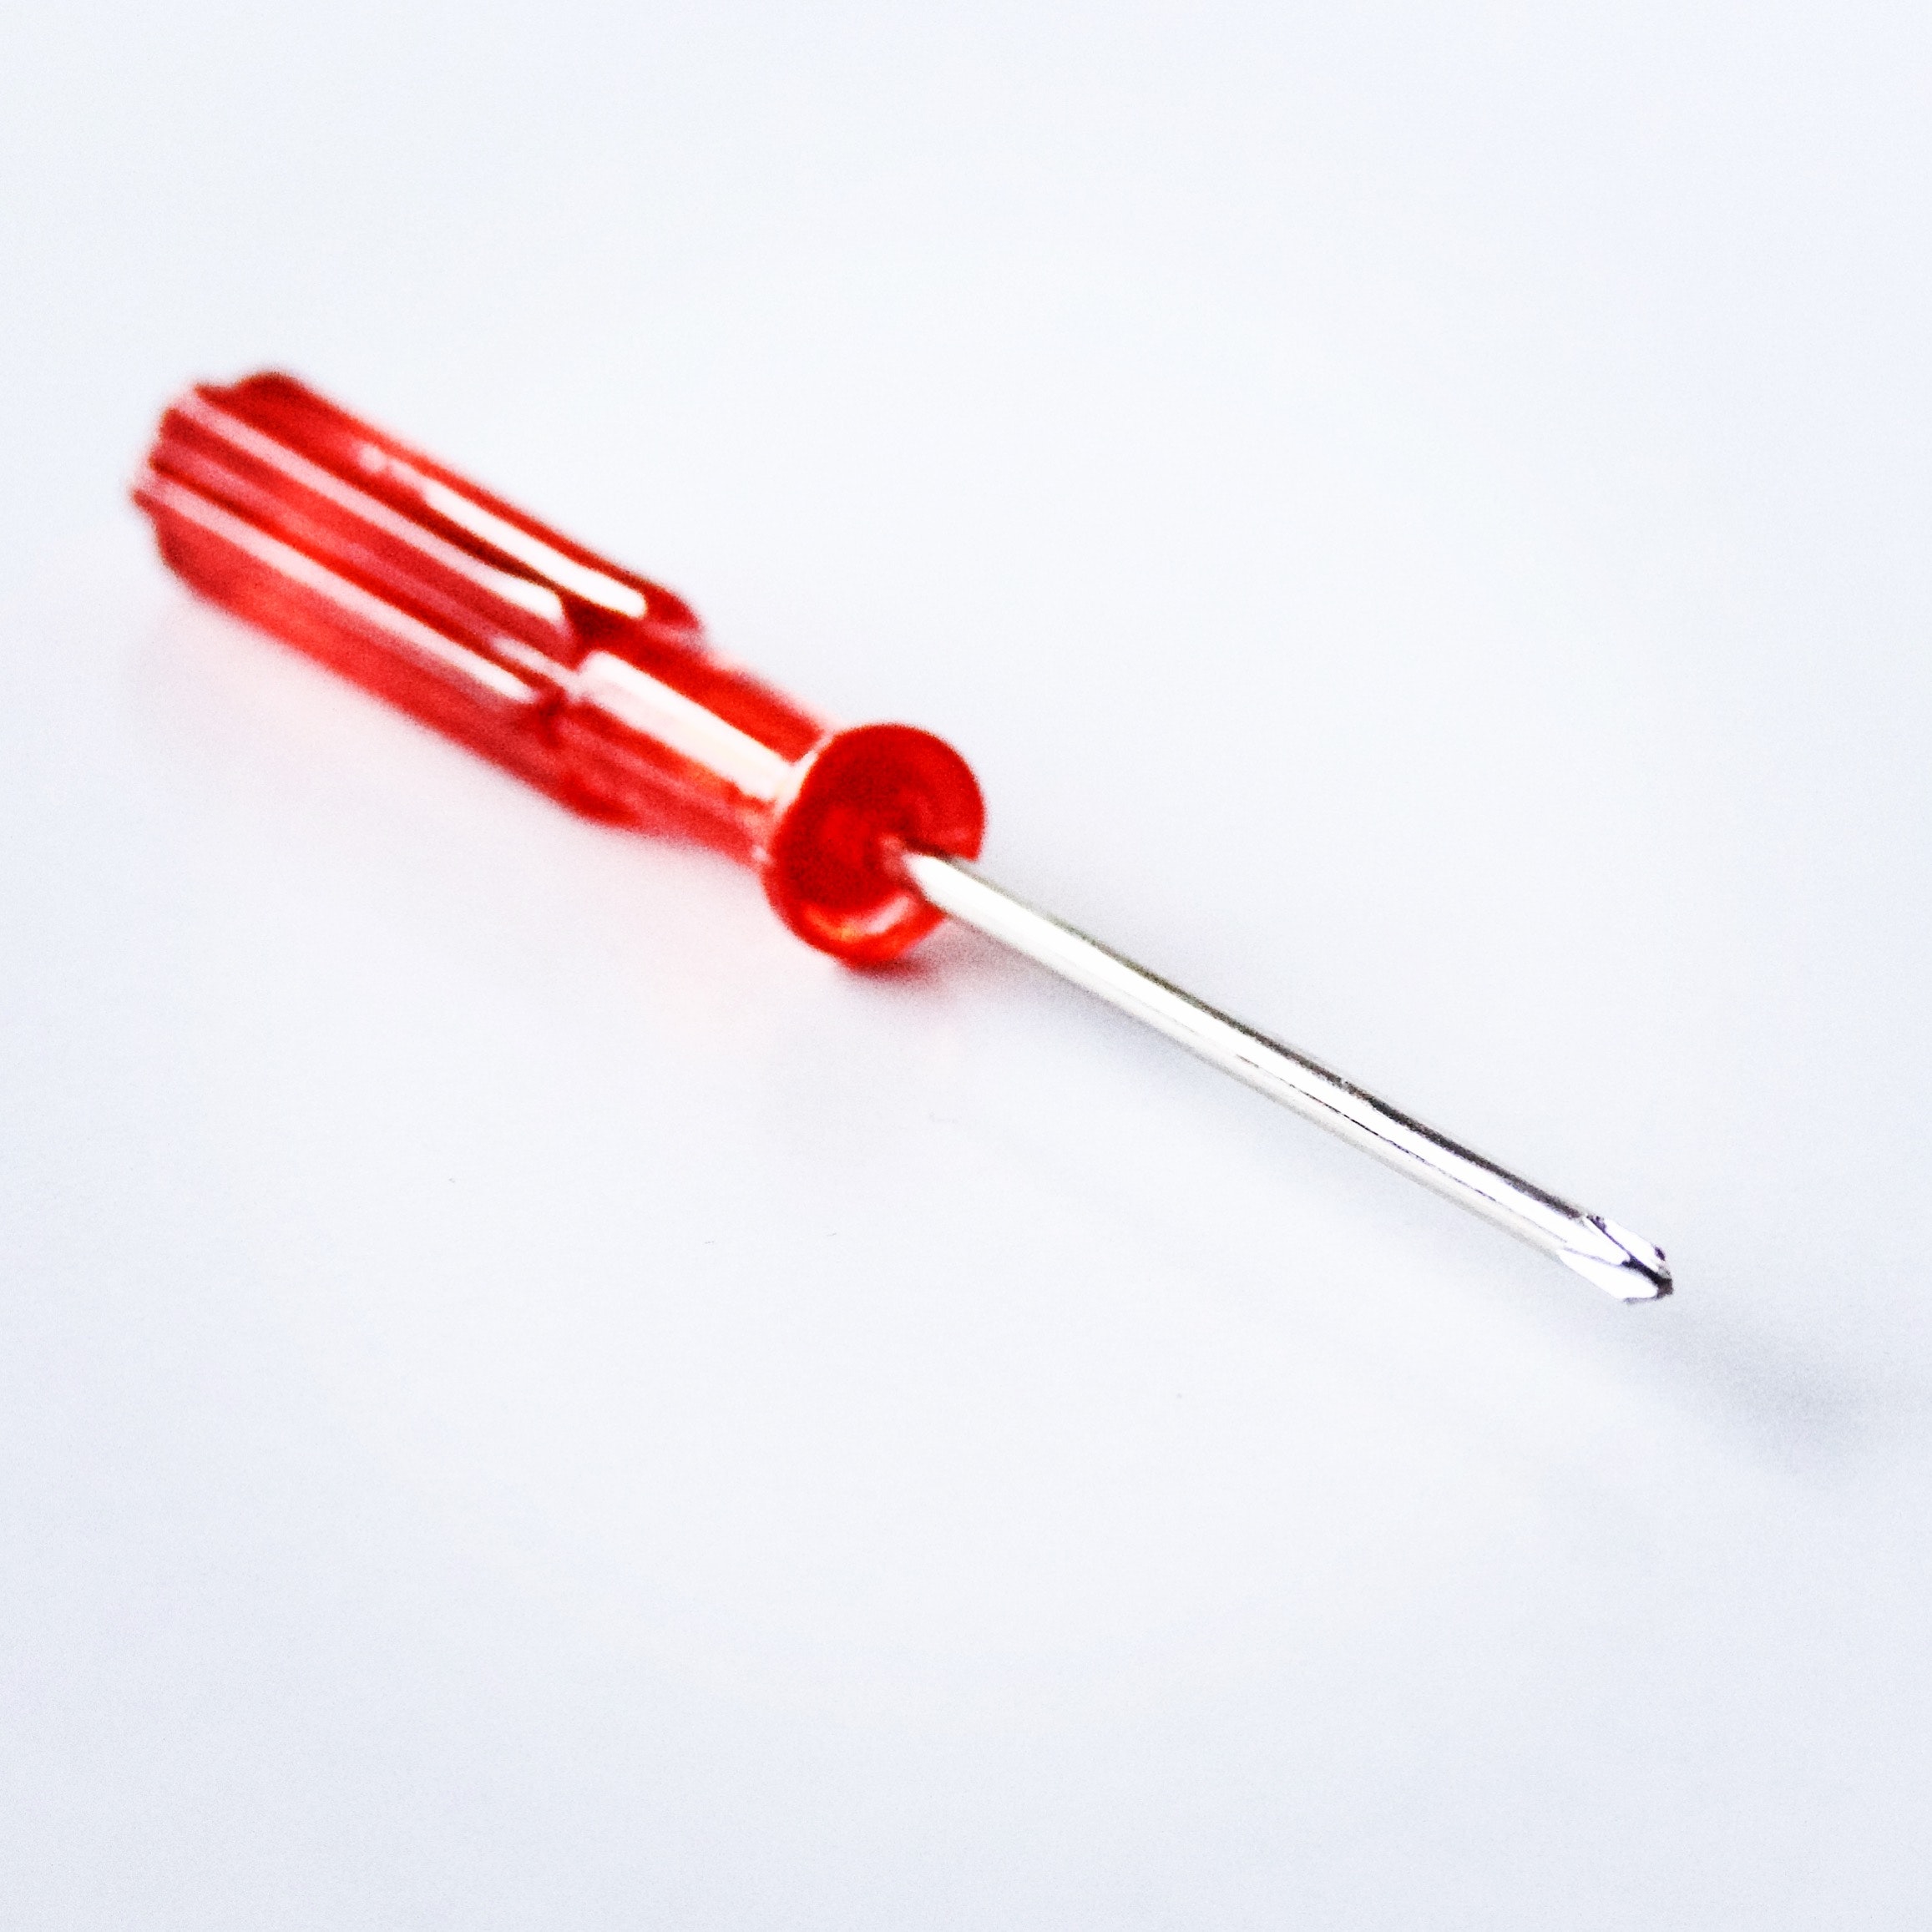 Close-Up Photography of Red Screwdriver, Chrome, Close-up, Equipment, Metal, HQ Photo